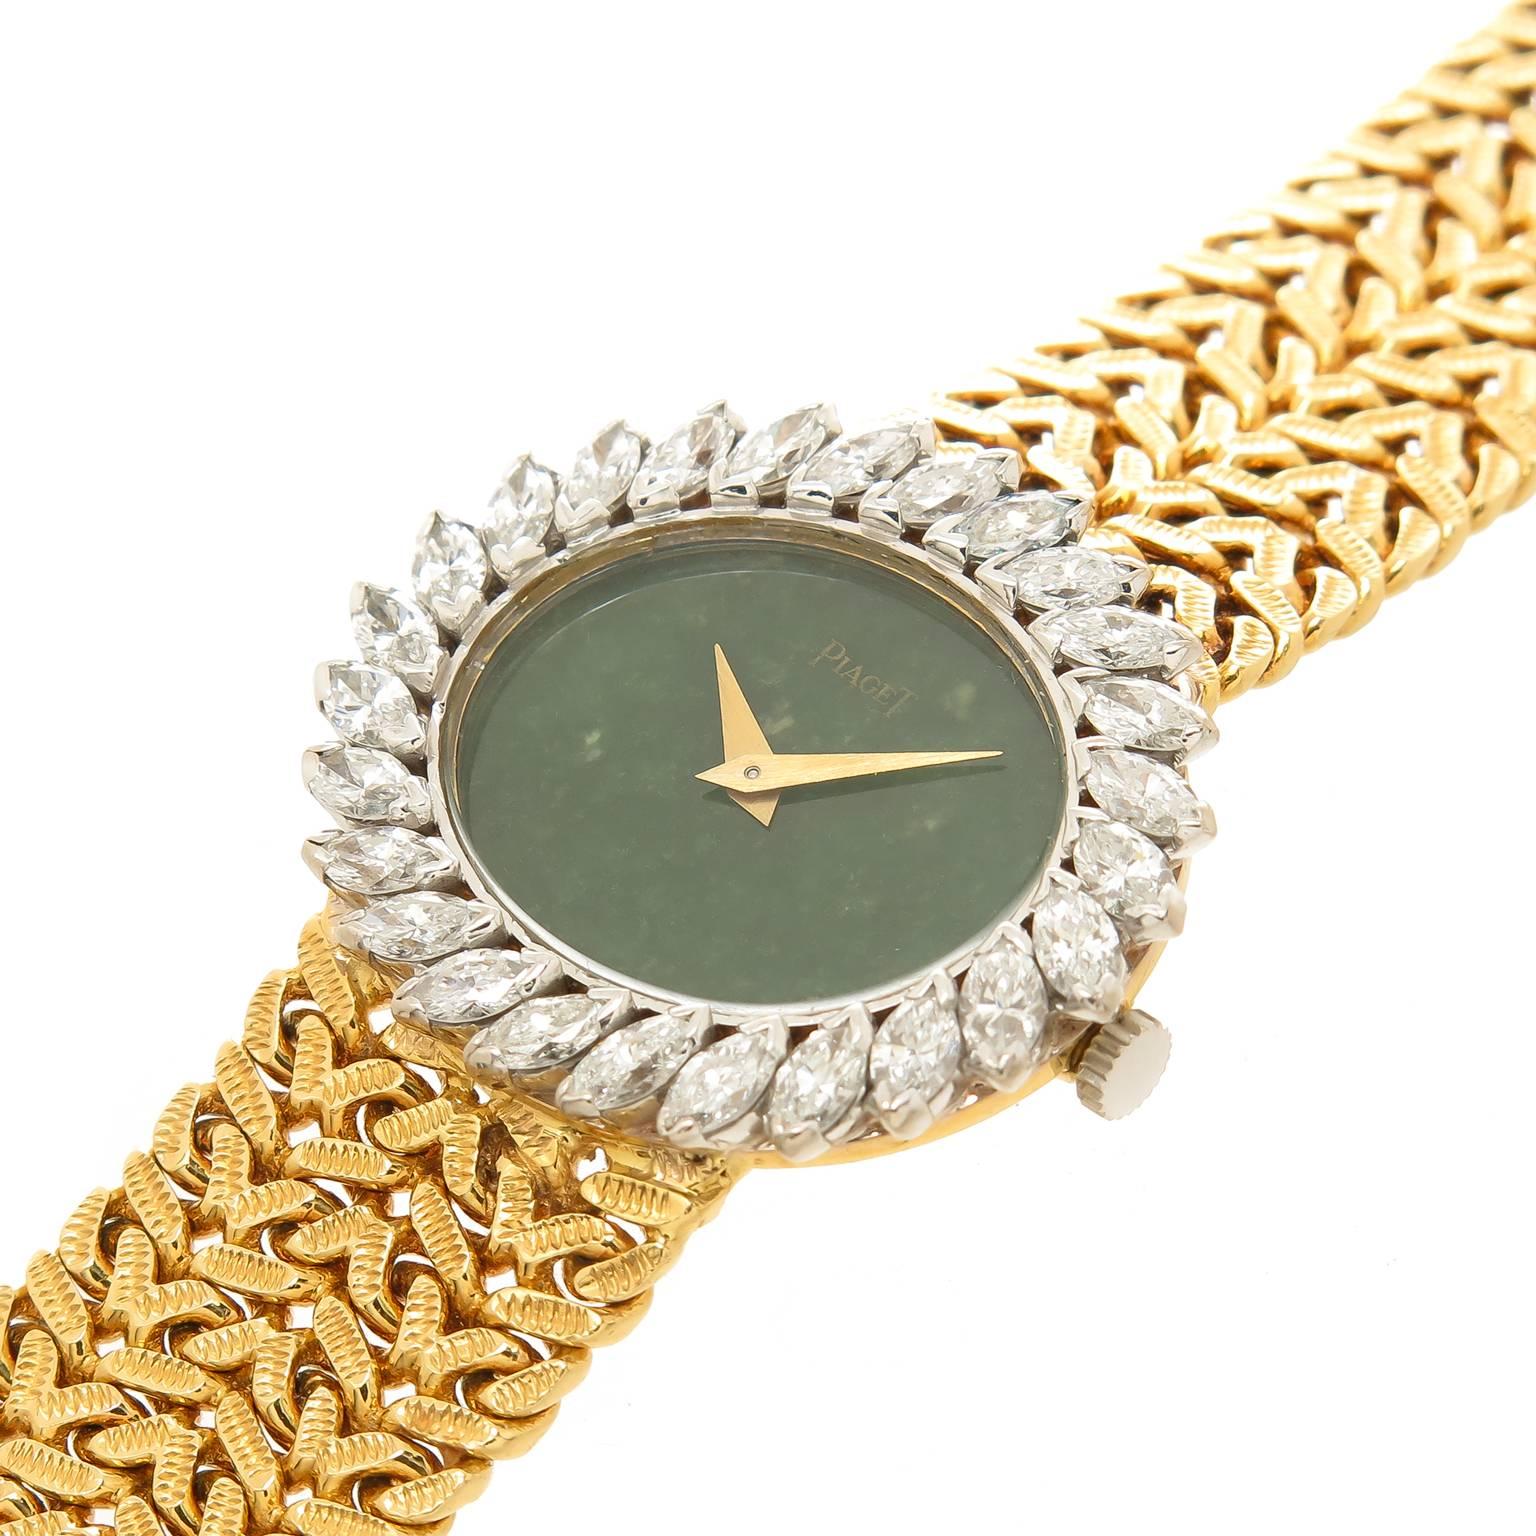 Circa 1970s Piaget 18K Yellow Gold Ladies Wrist watch, measuring 29 X 24 MM oval and having a White Gold Bezel set with Marquise Diamonds totaling 2.50 Carats and Grading as G in Color and VS in Clarity. Manual Wind Movement, Green Agate stone Dial